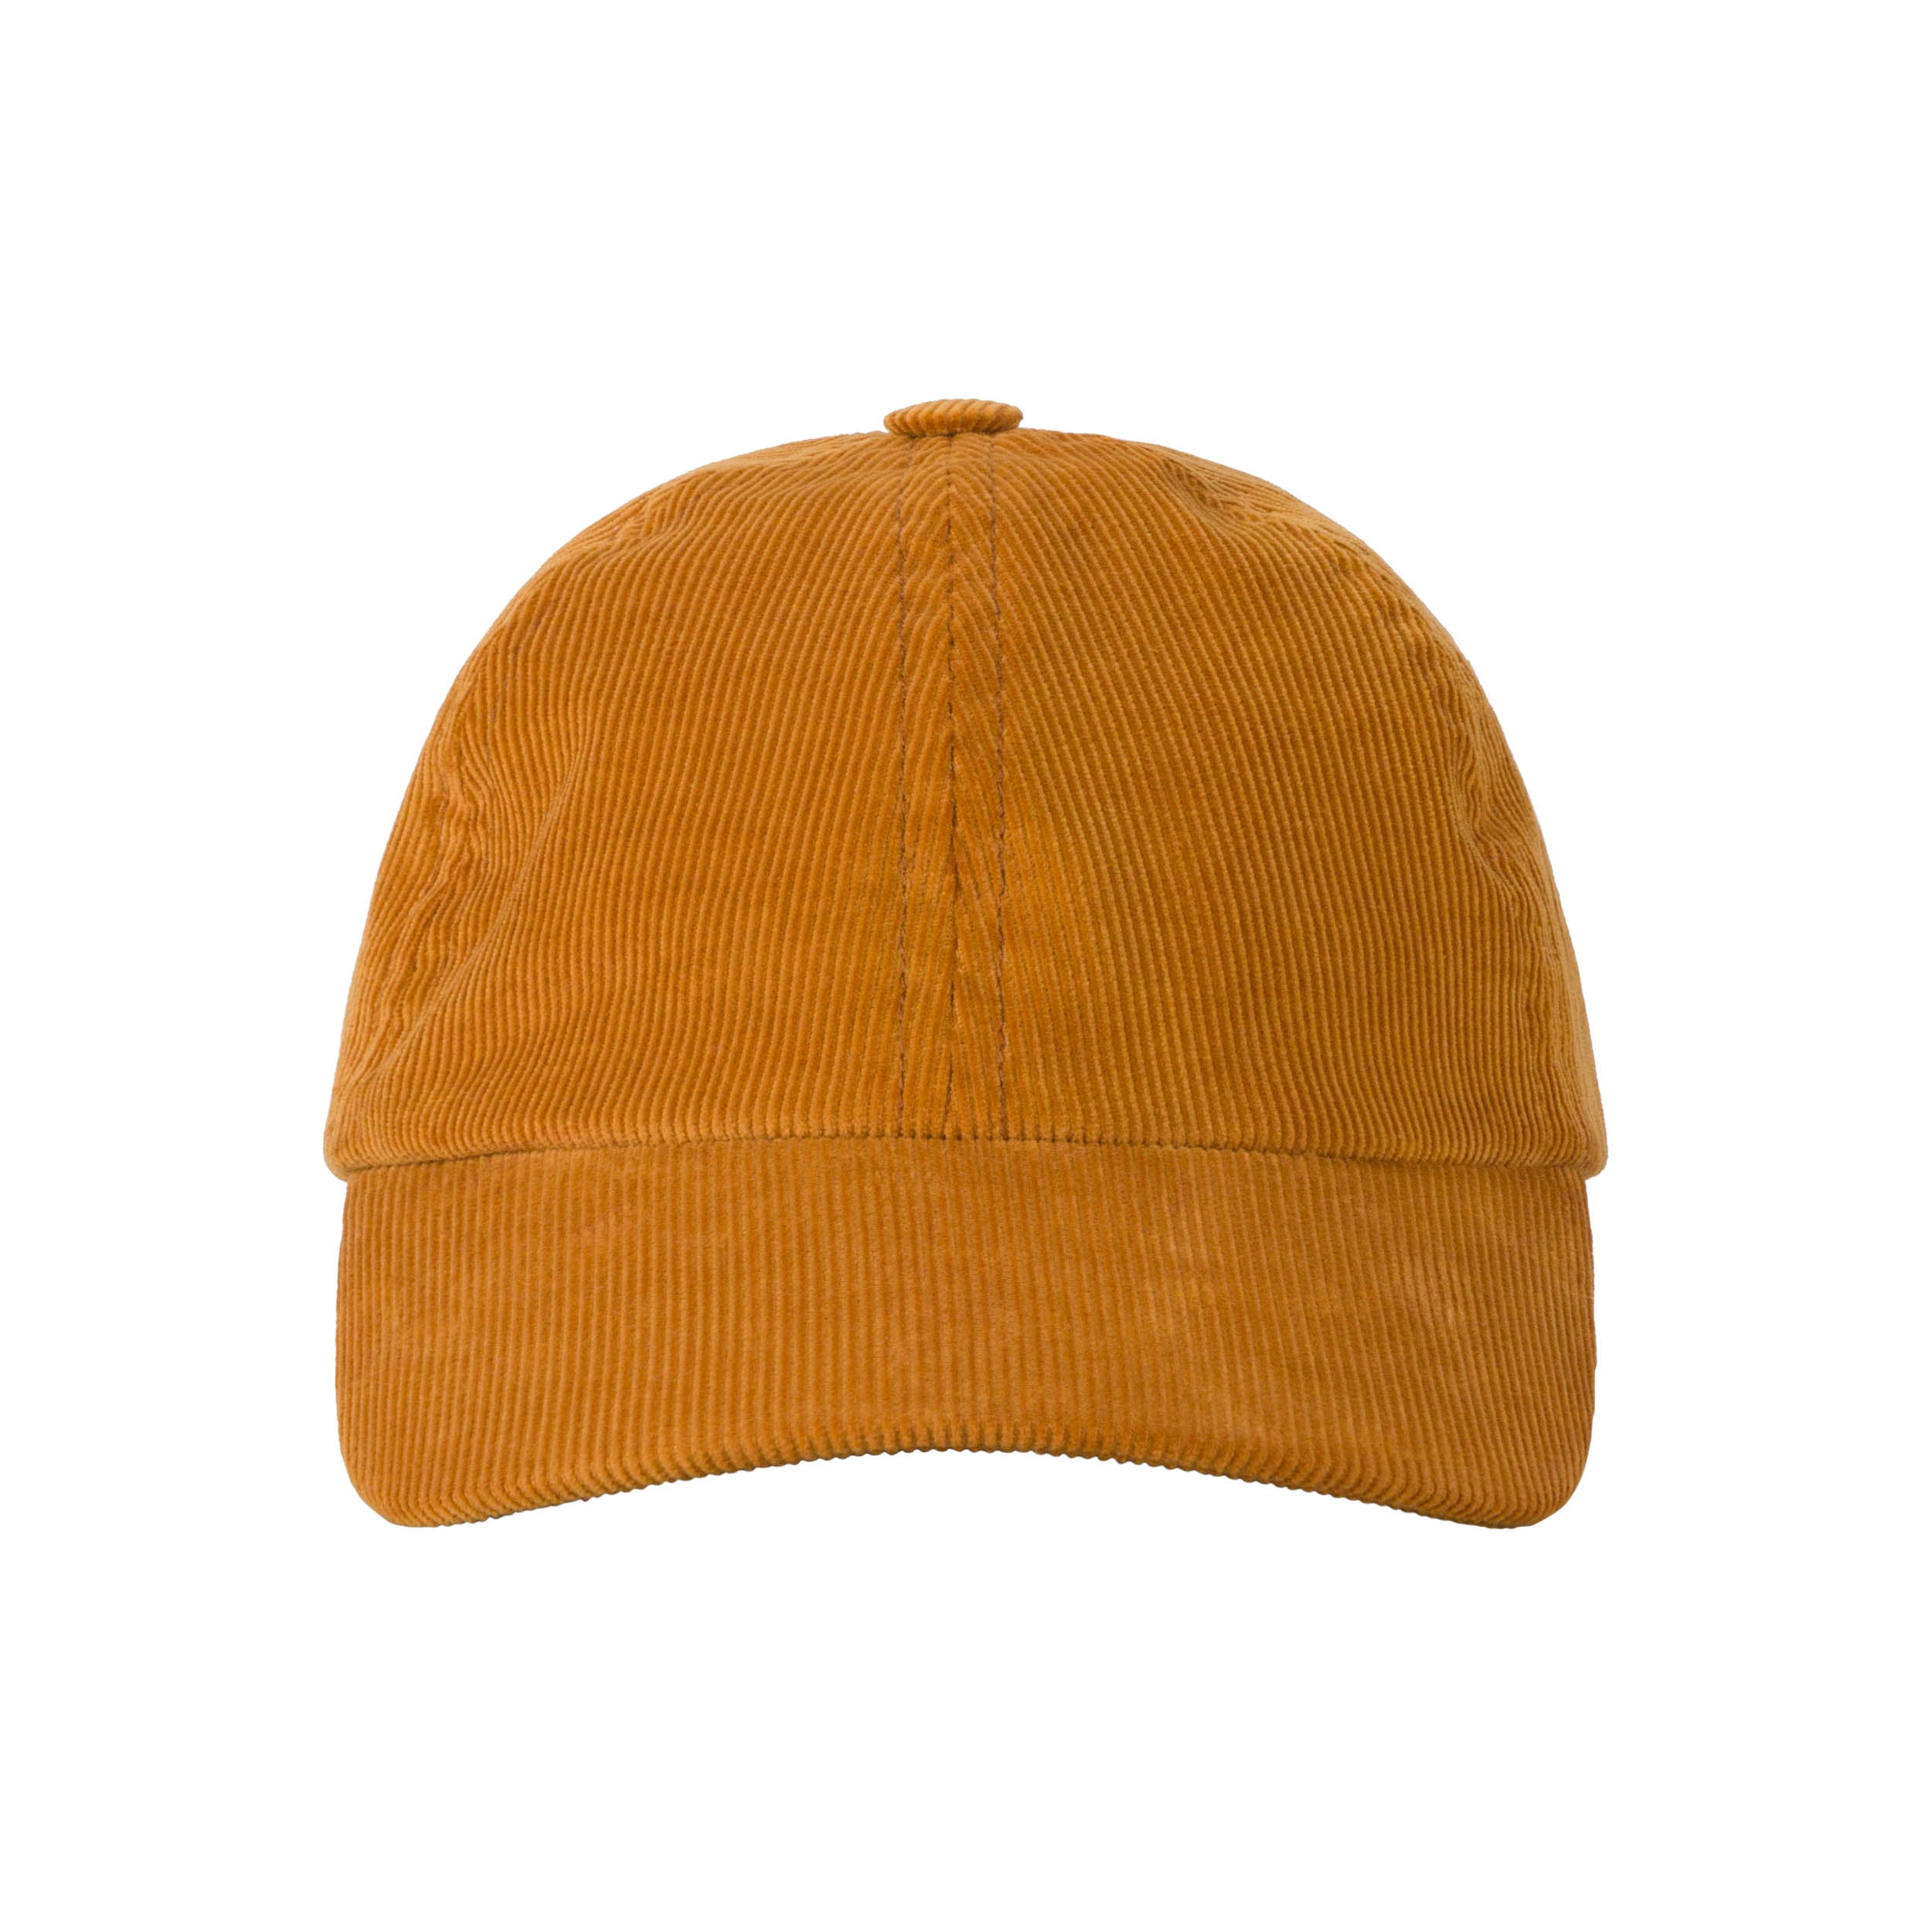 Carrier Company Corduroy Baseball Cap in Gold